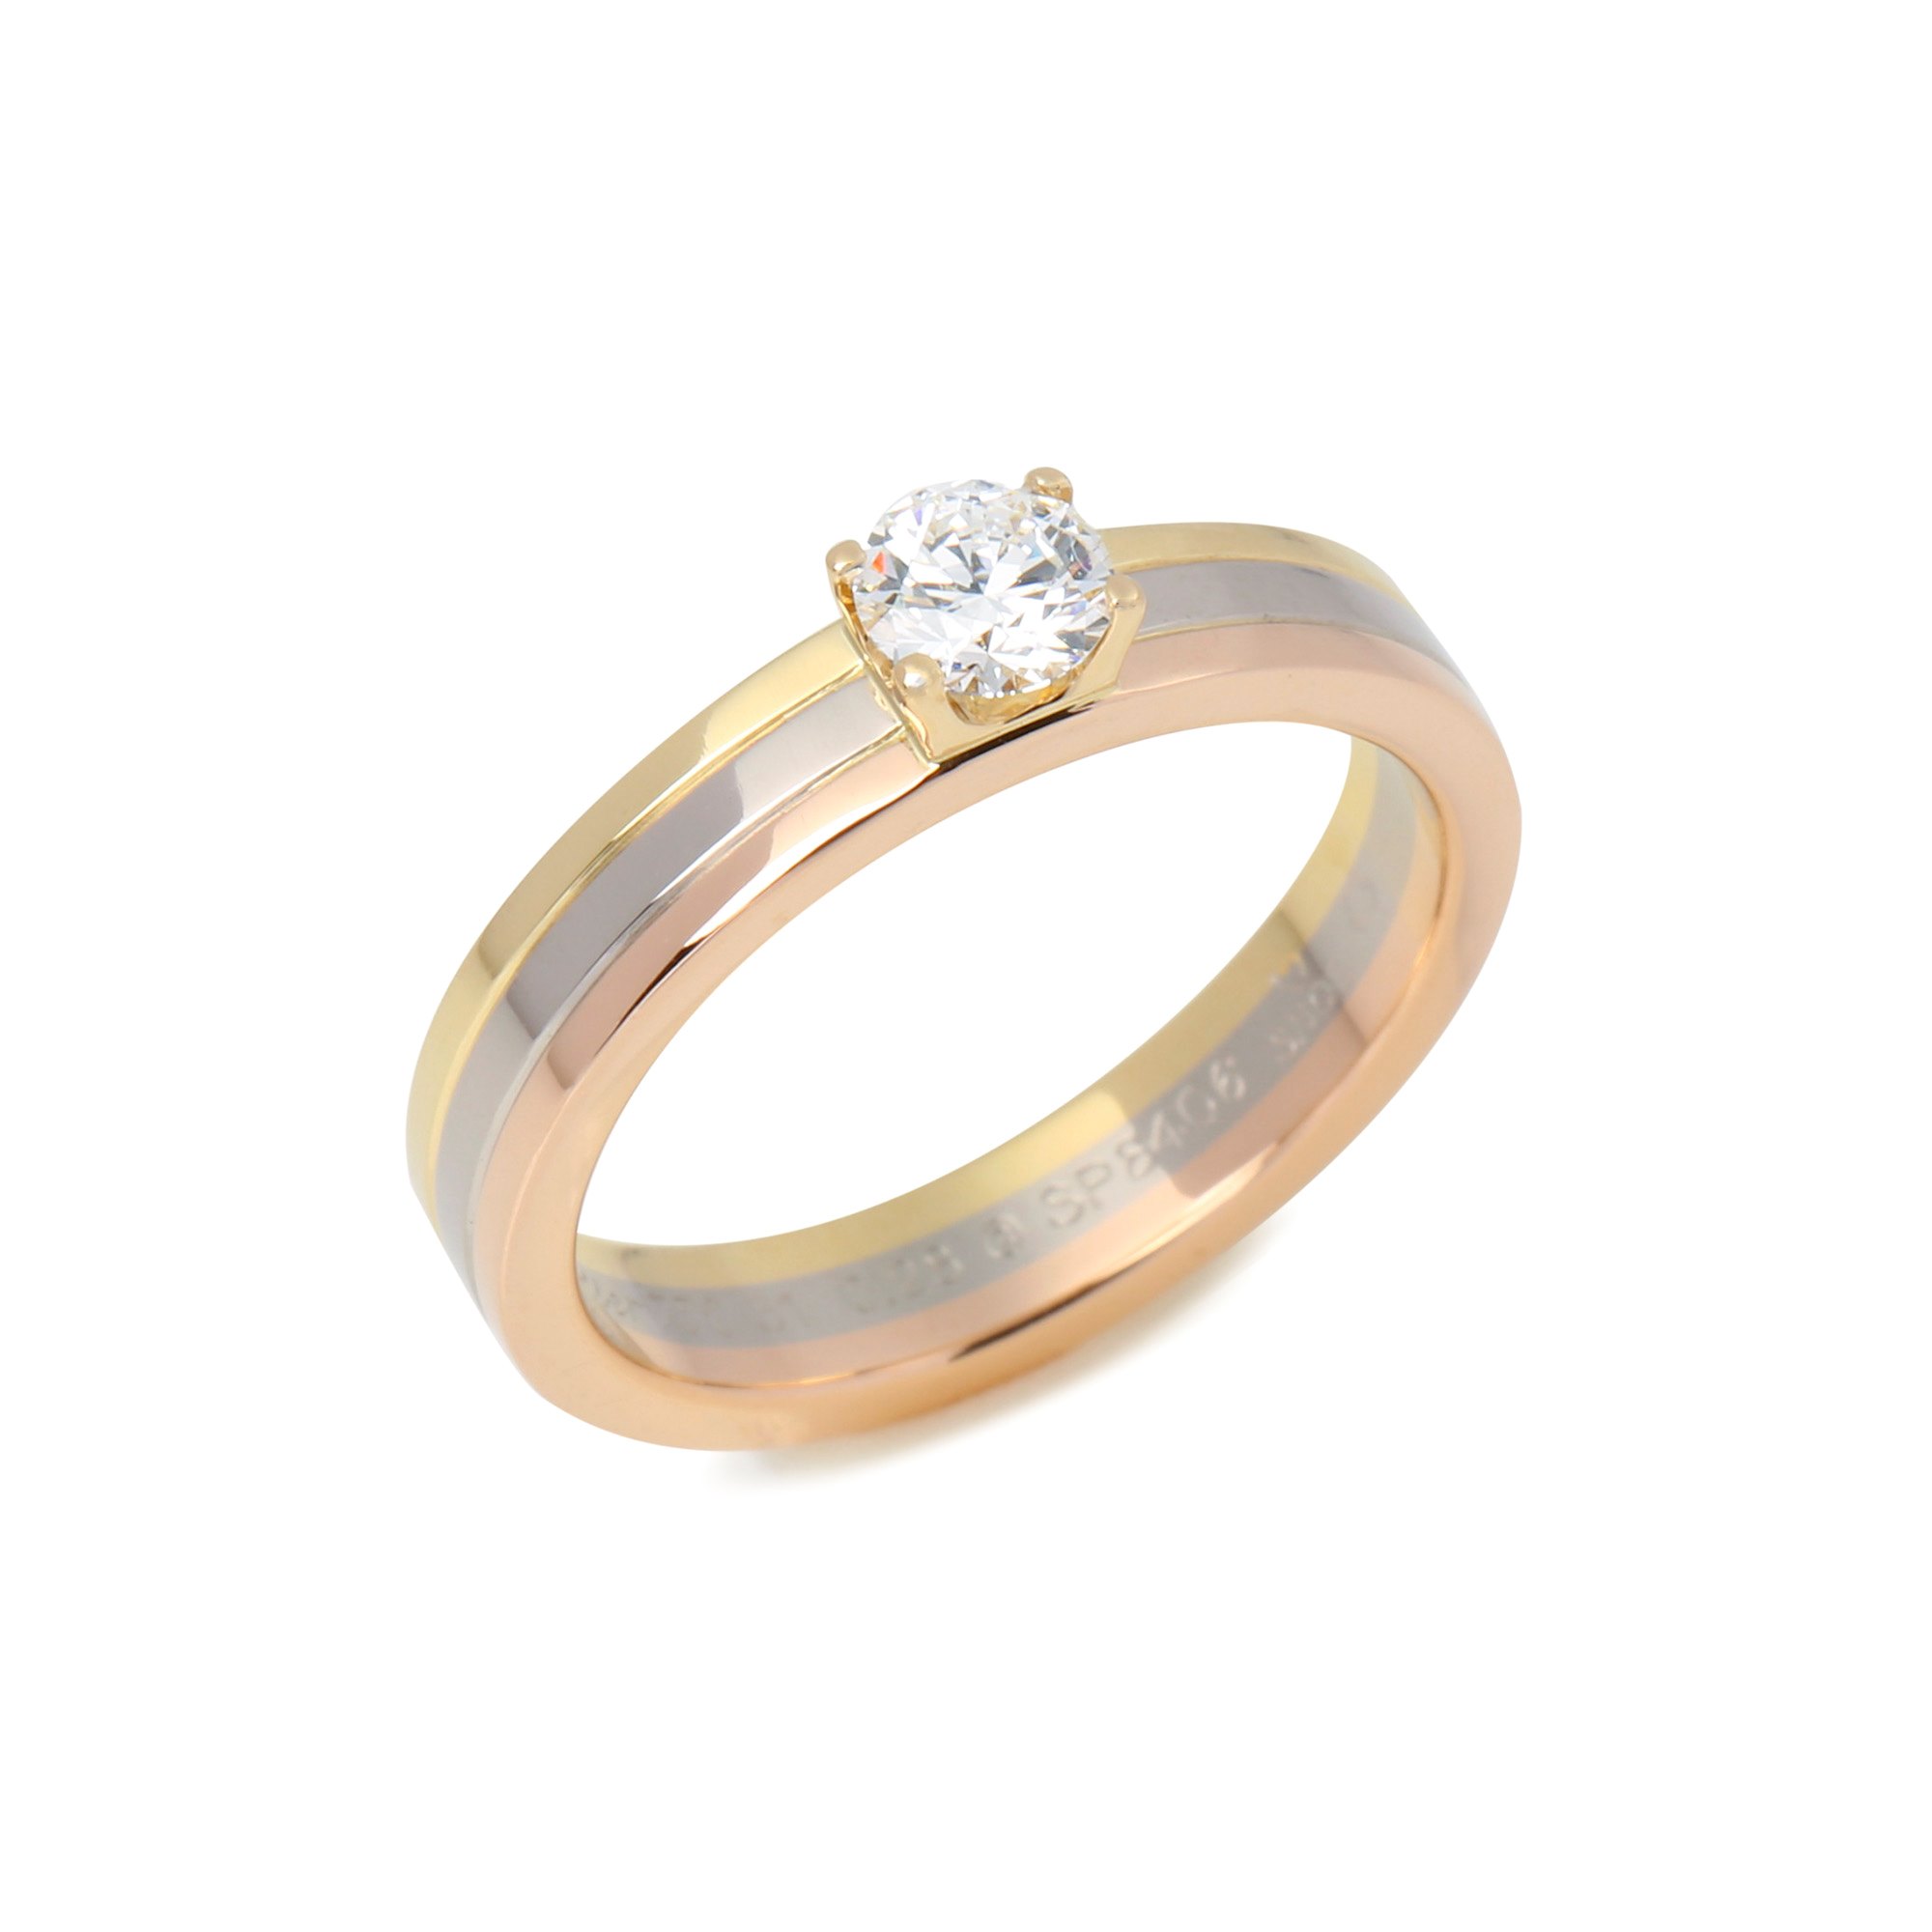 Cartier 18ct Gold Trinity solitaire ring